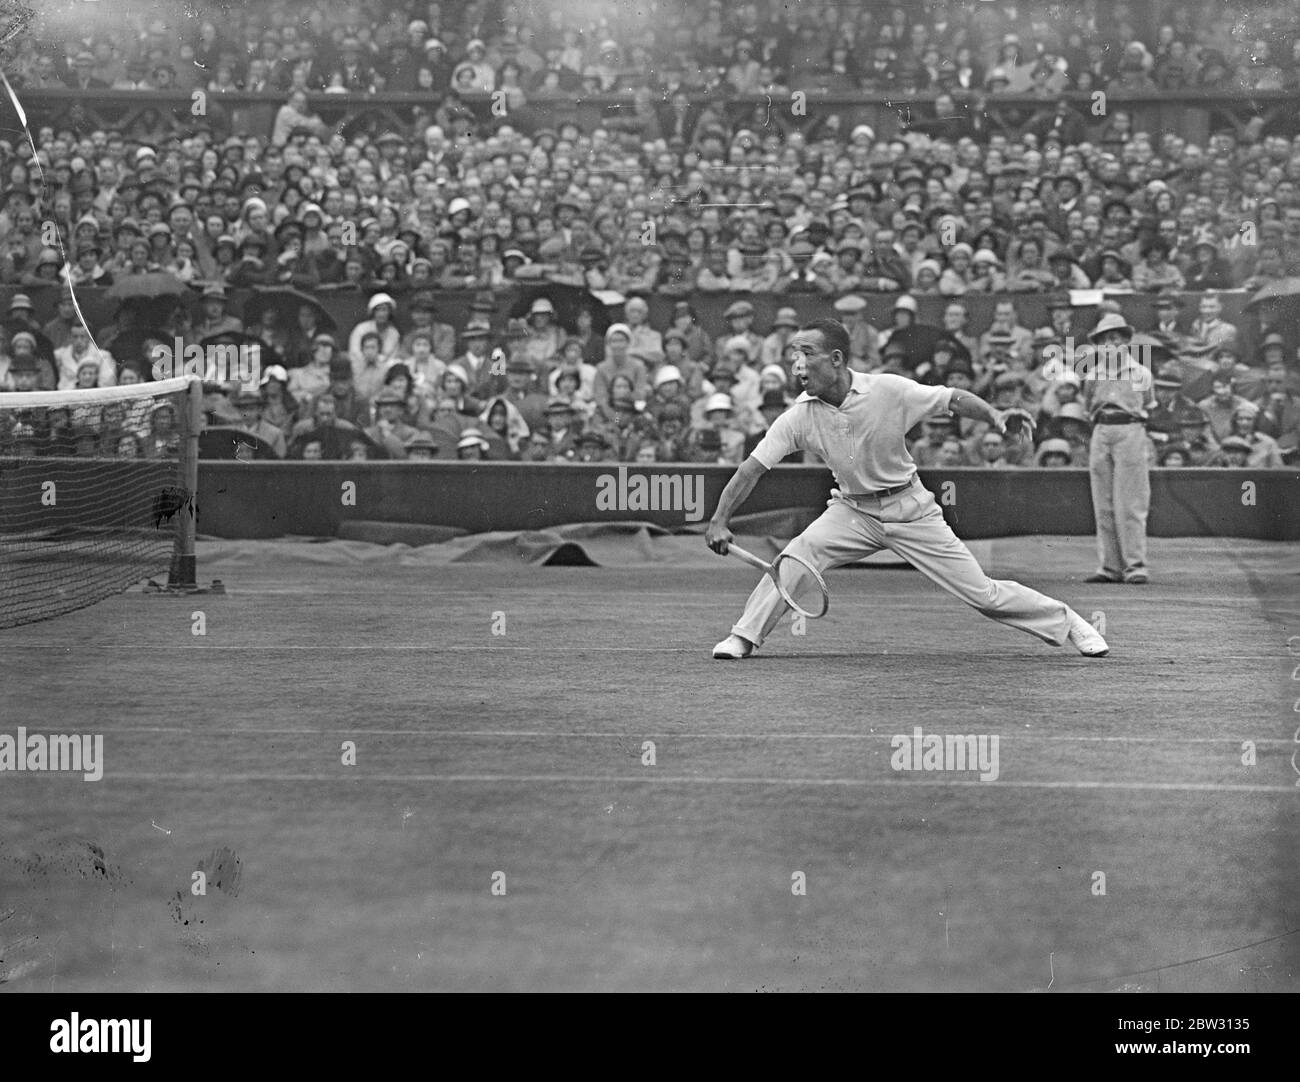 Austin wins in semi finals at Wimbledon . H W  Bunny  Austin , the English tennis player , defeated Satoh of Japan in the semi finals of the men 's singles in the Wimbledon tennis championships . Satoh in action during the match . 30 June 1932 Stock Photo